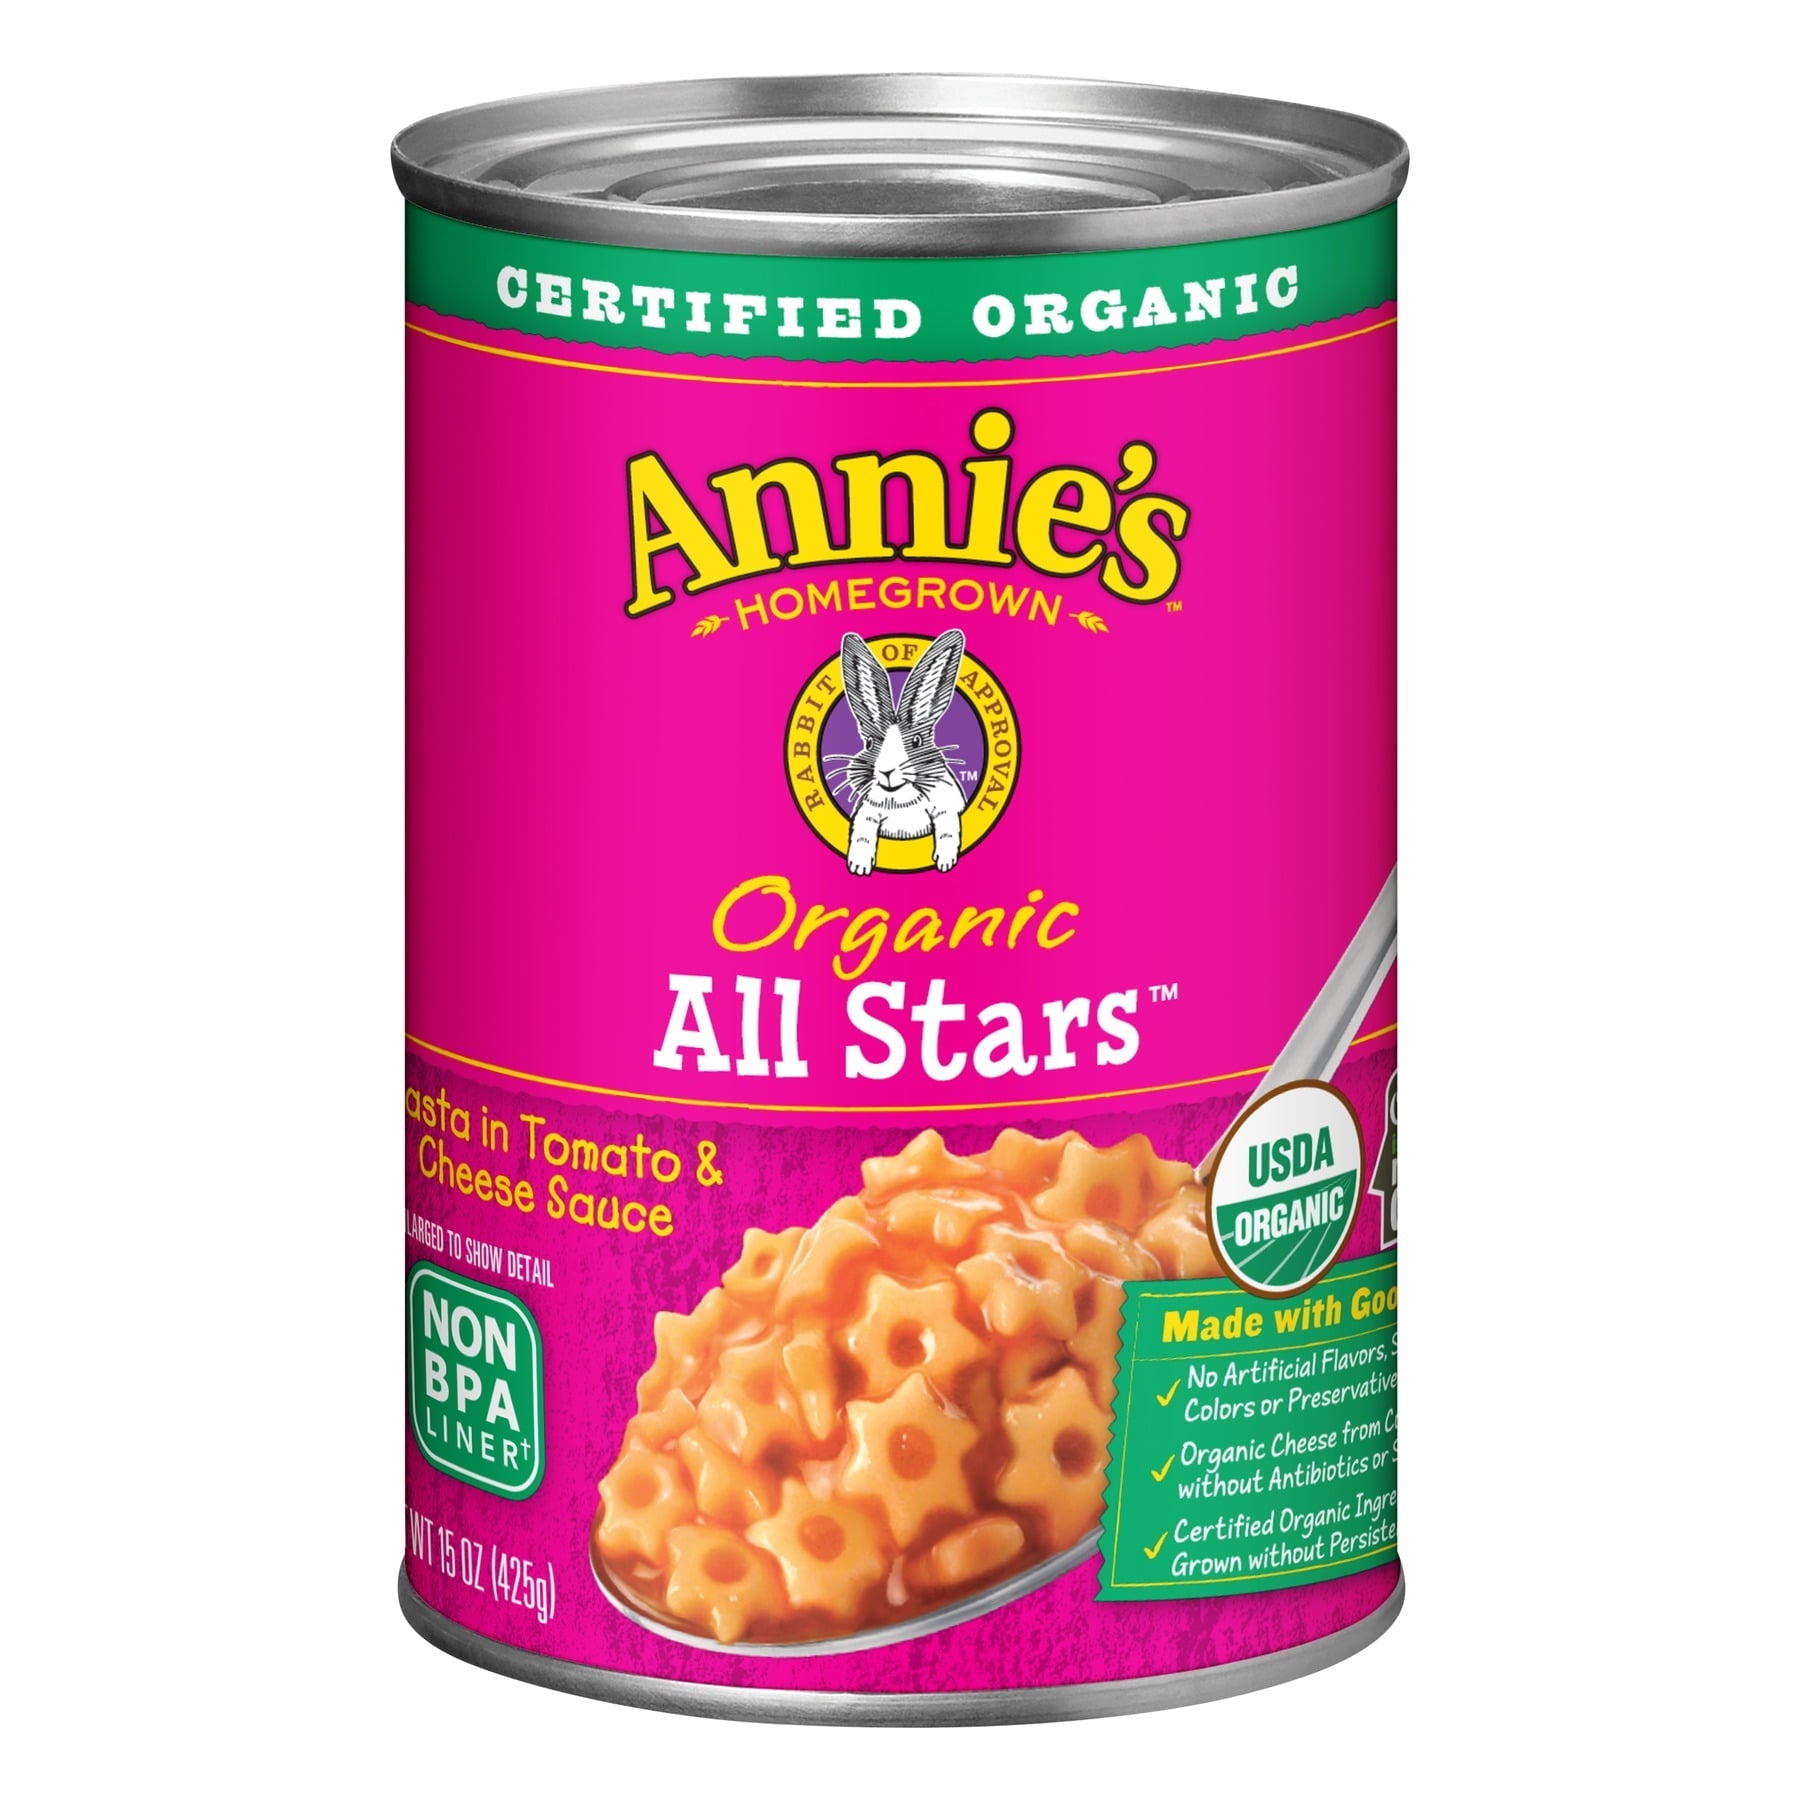 Annie's Homegrown All Stars Pasta in Tomate & Cheese Sauce 15 Oz Can